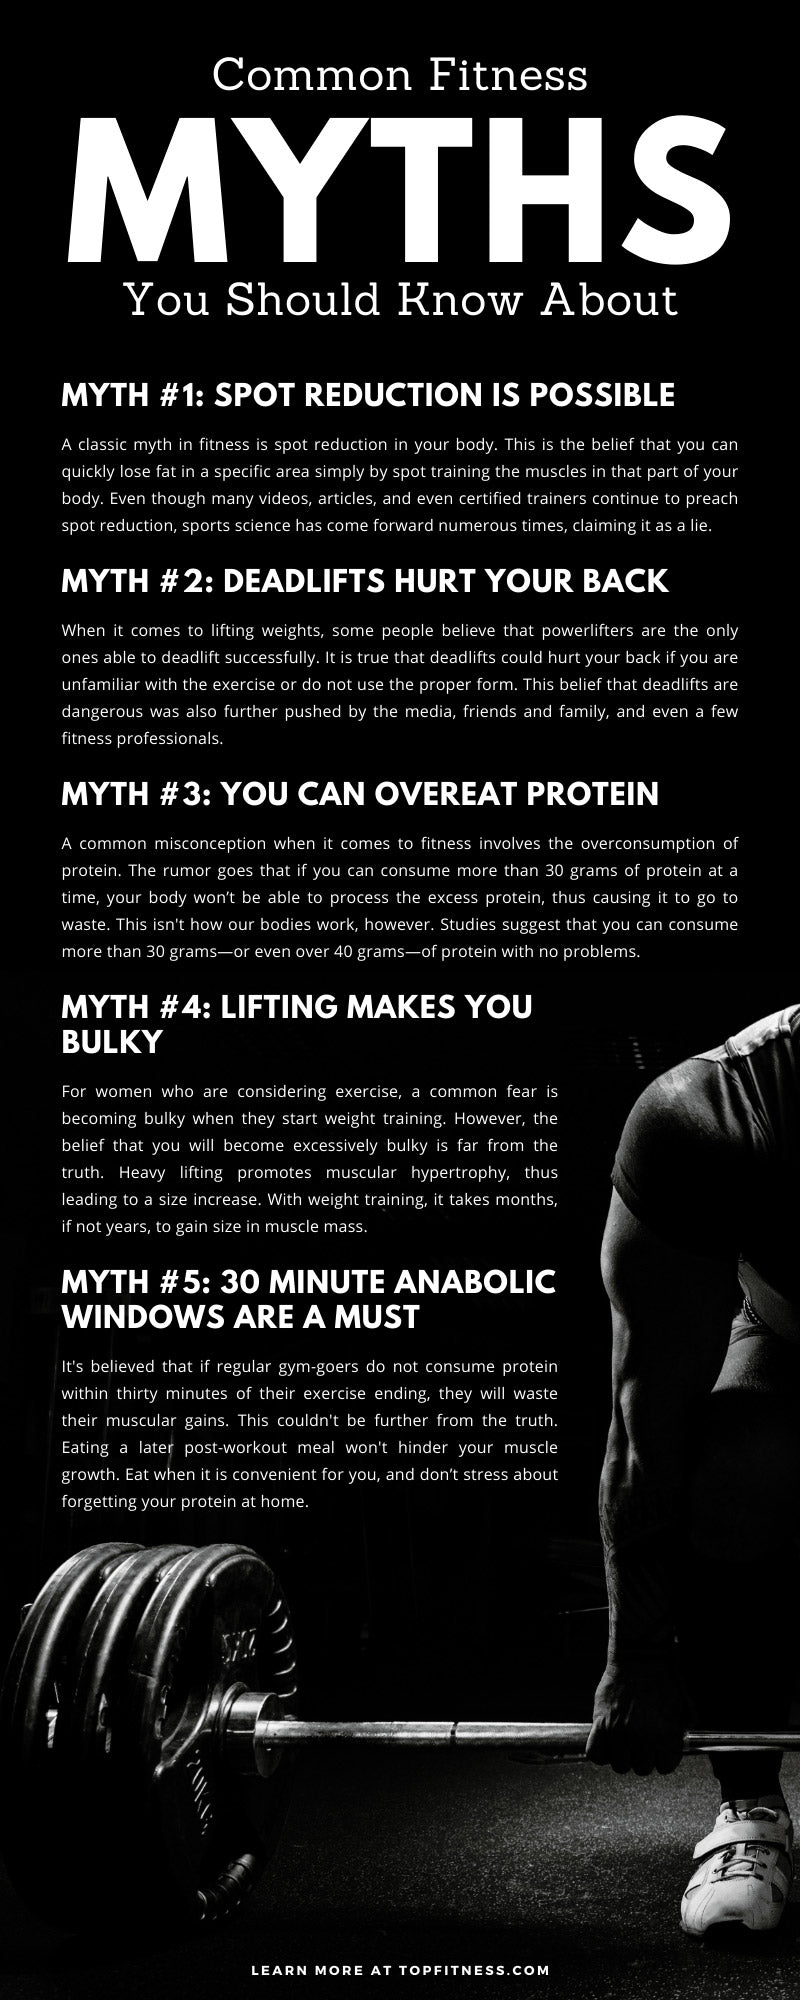 How To Workout: The Guide of How To Get A Physique You Will Love – DMoose